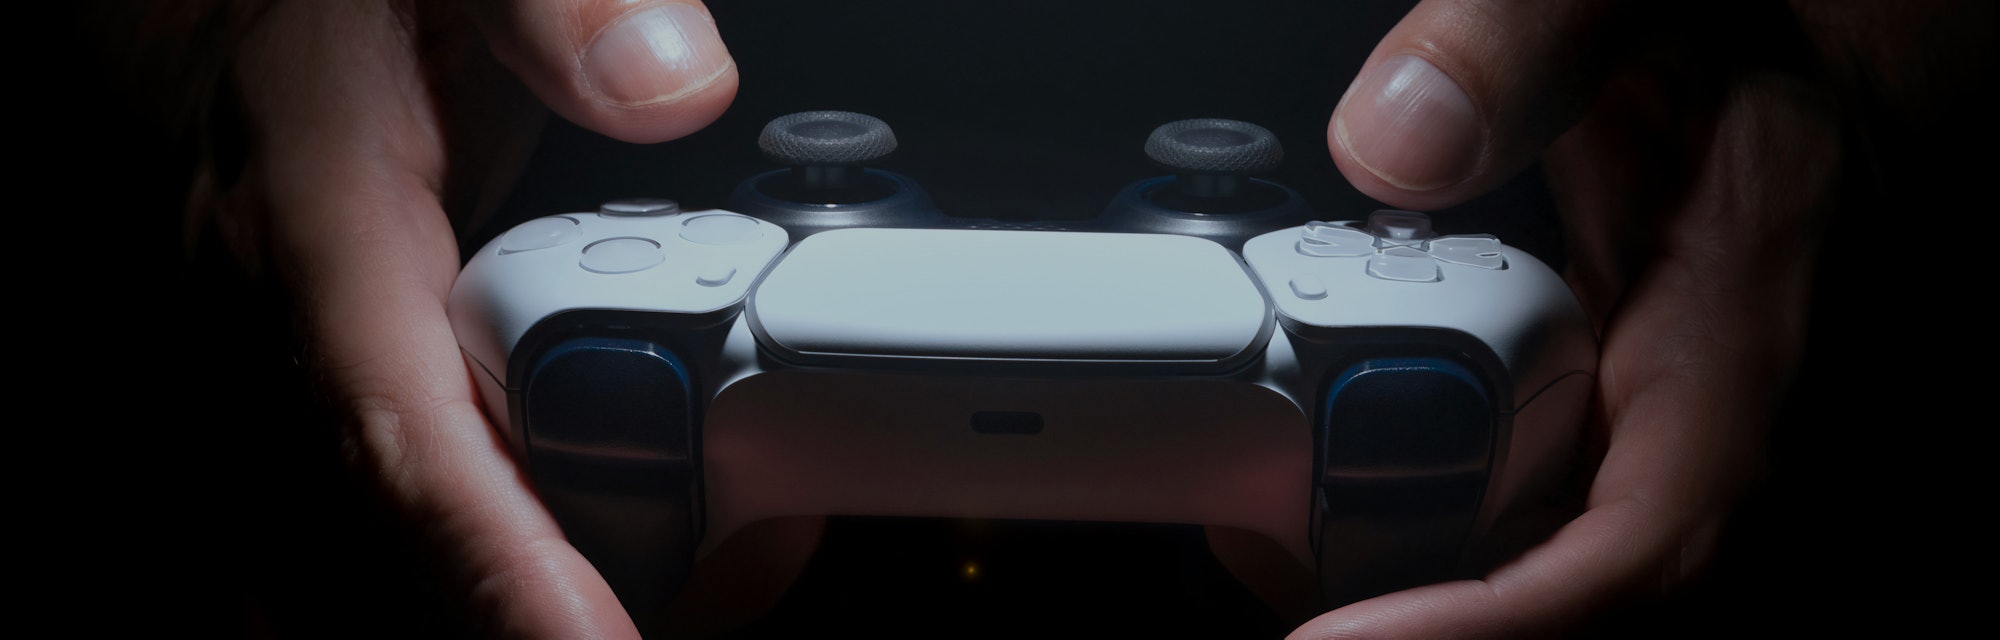 Hands holding a PS5 game controller with spot light.